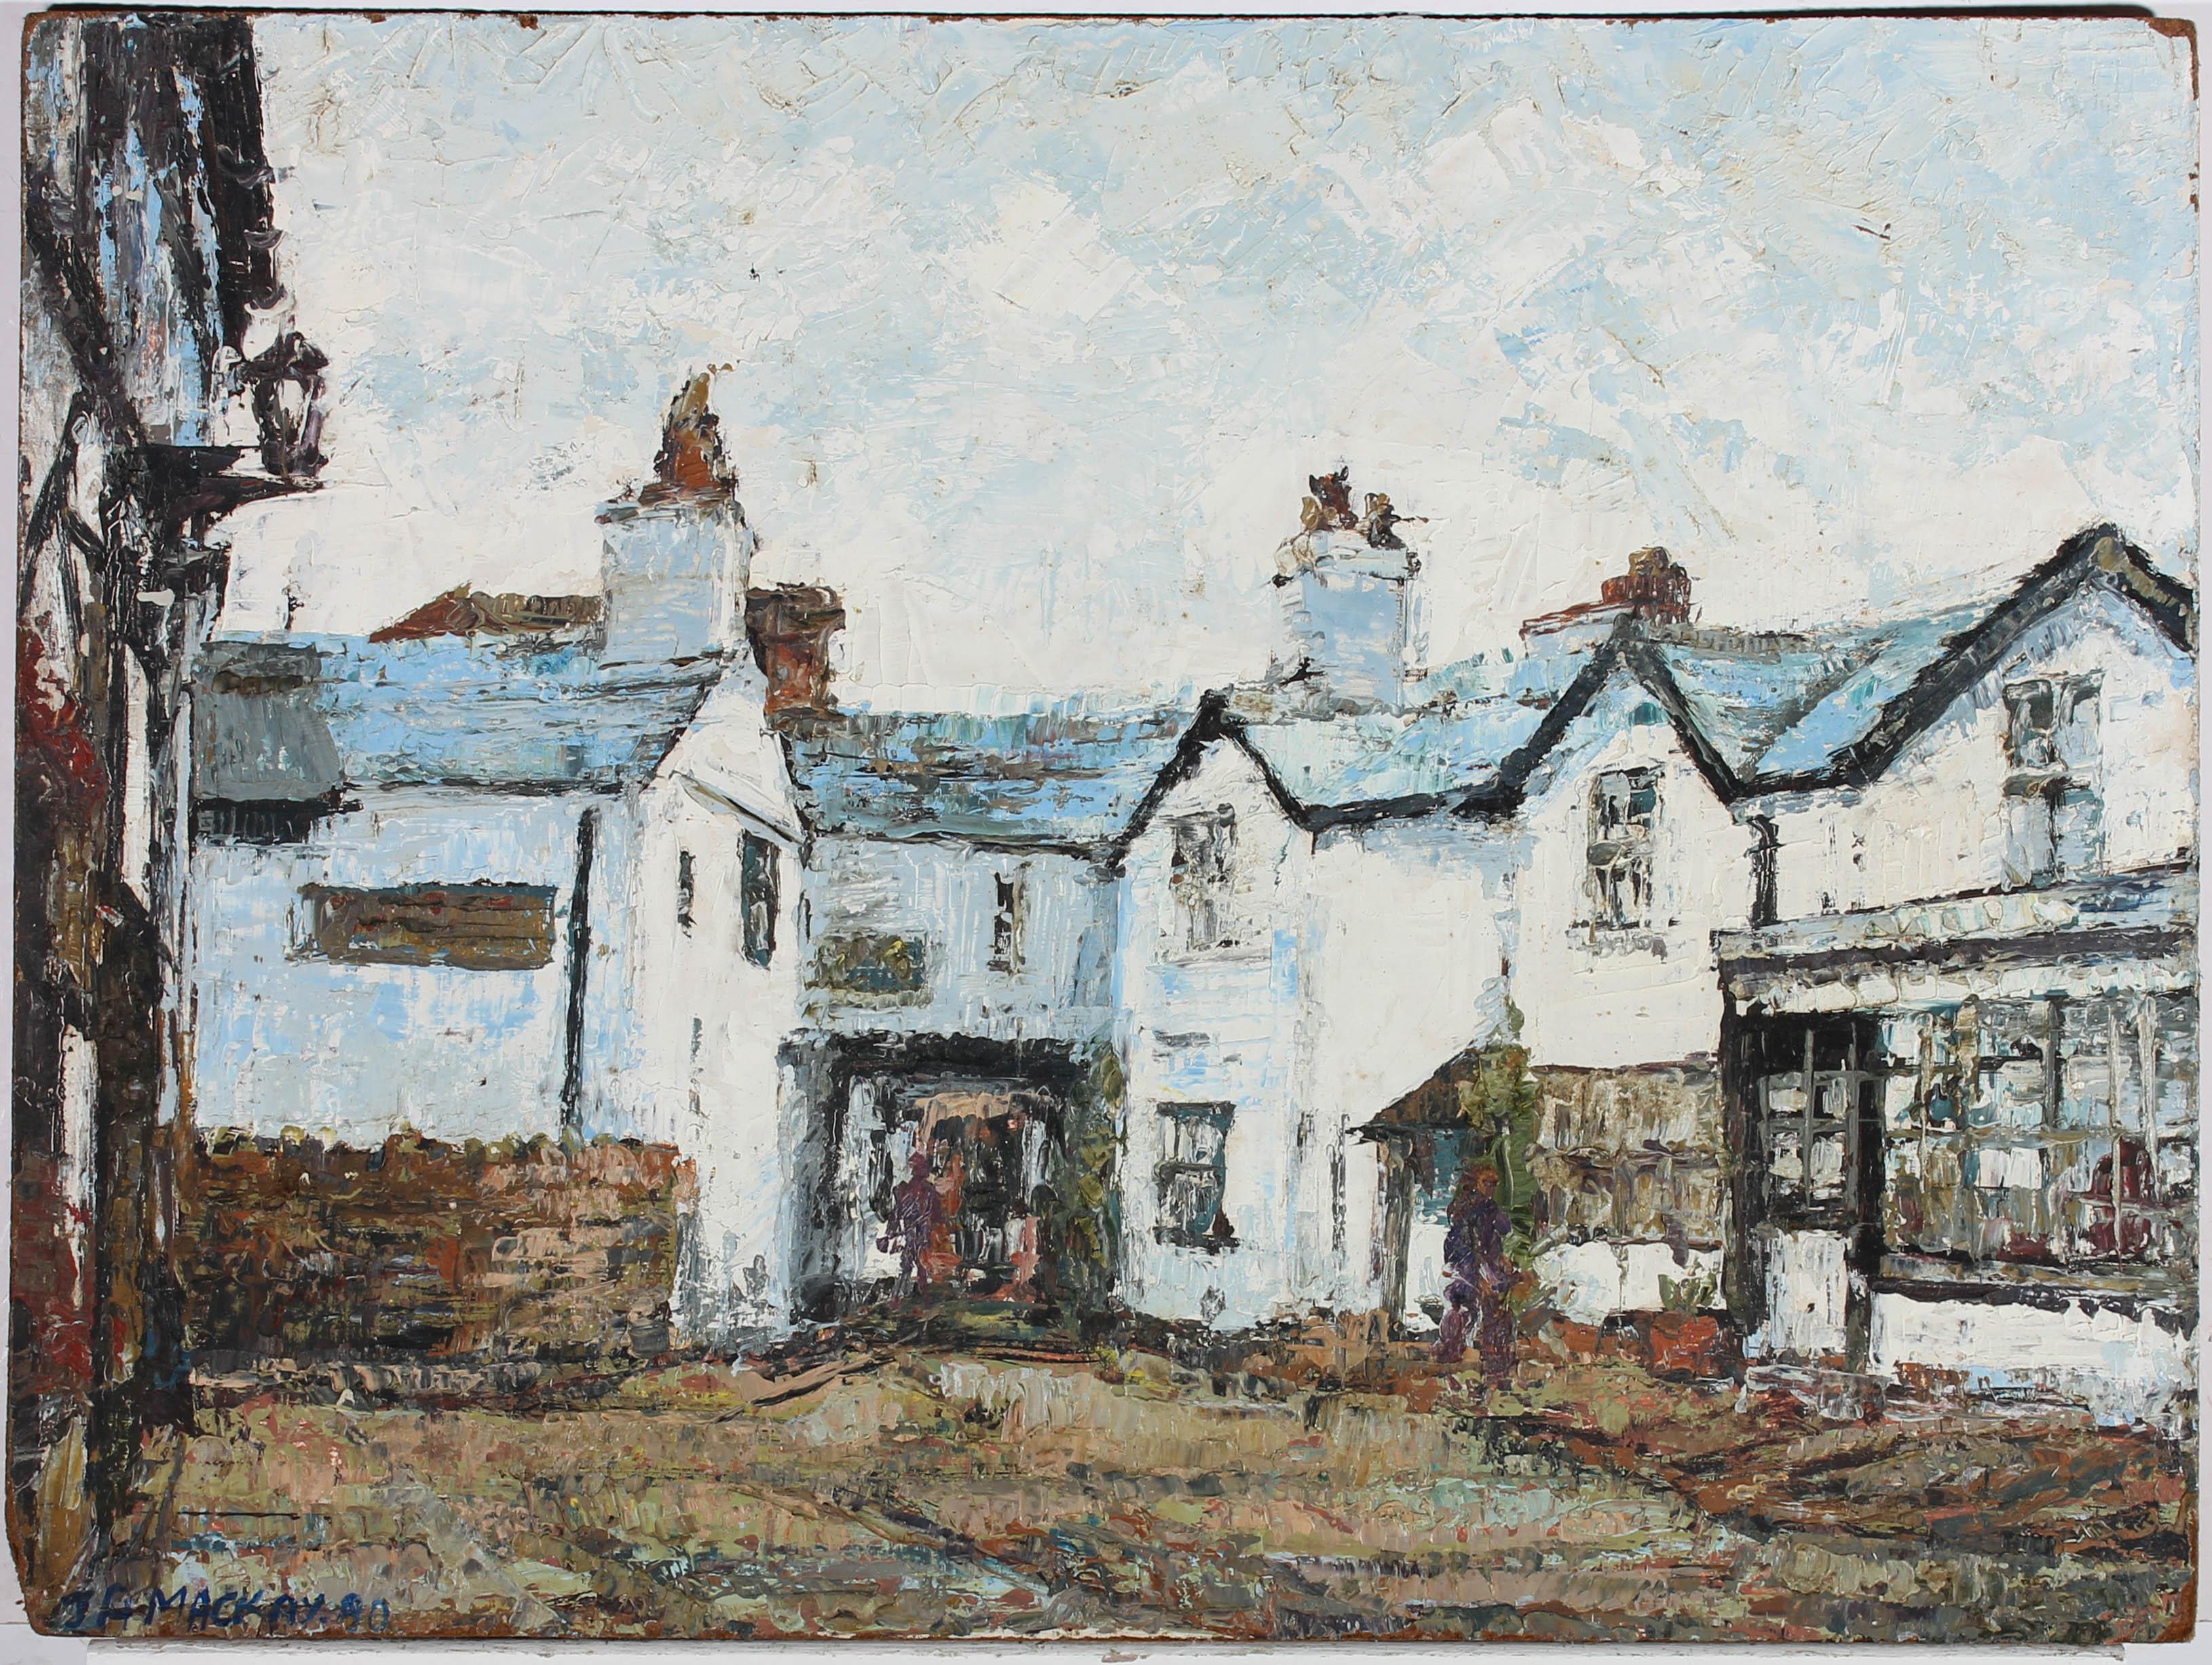 J A MacKay - 1980 Oil, The Old Town Courtyard - Painting by J A Mackay